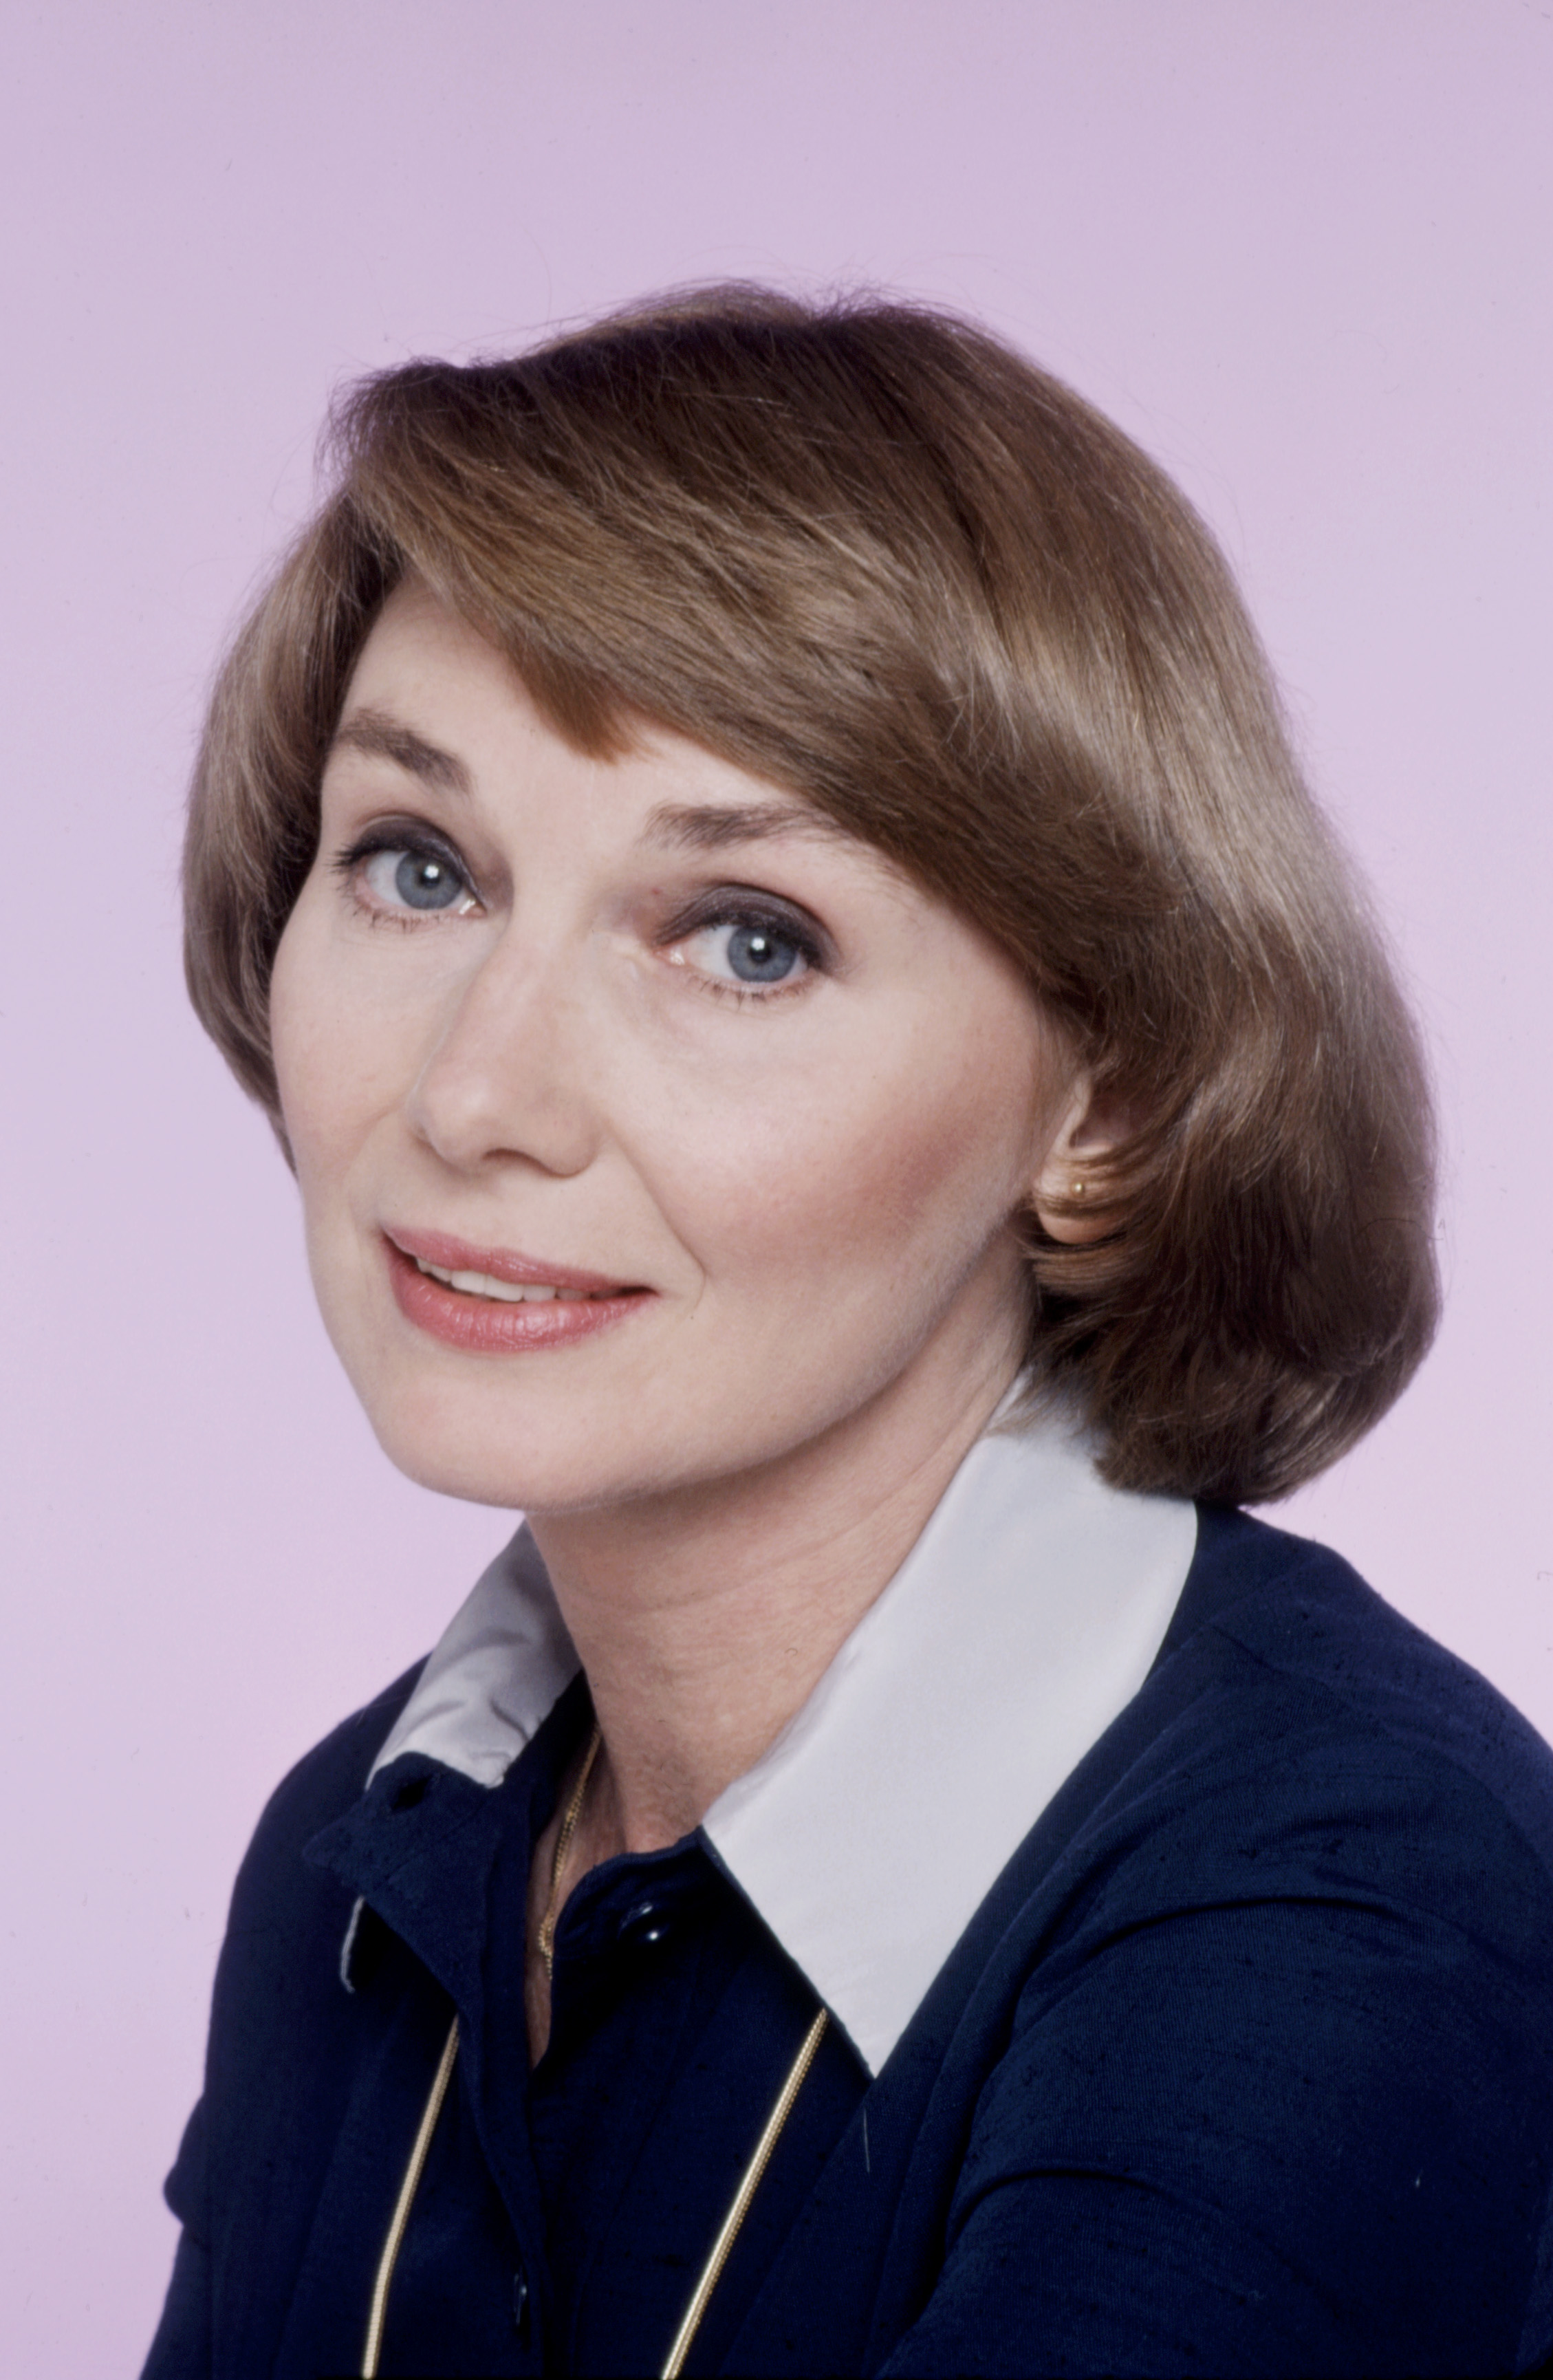 Inga Swenson pictured in a promotional photo for the TV show "Benson" on January 1, 1980 in Los Angeles, California | Source: Getty Images